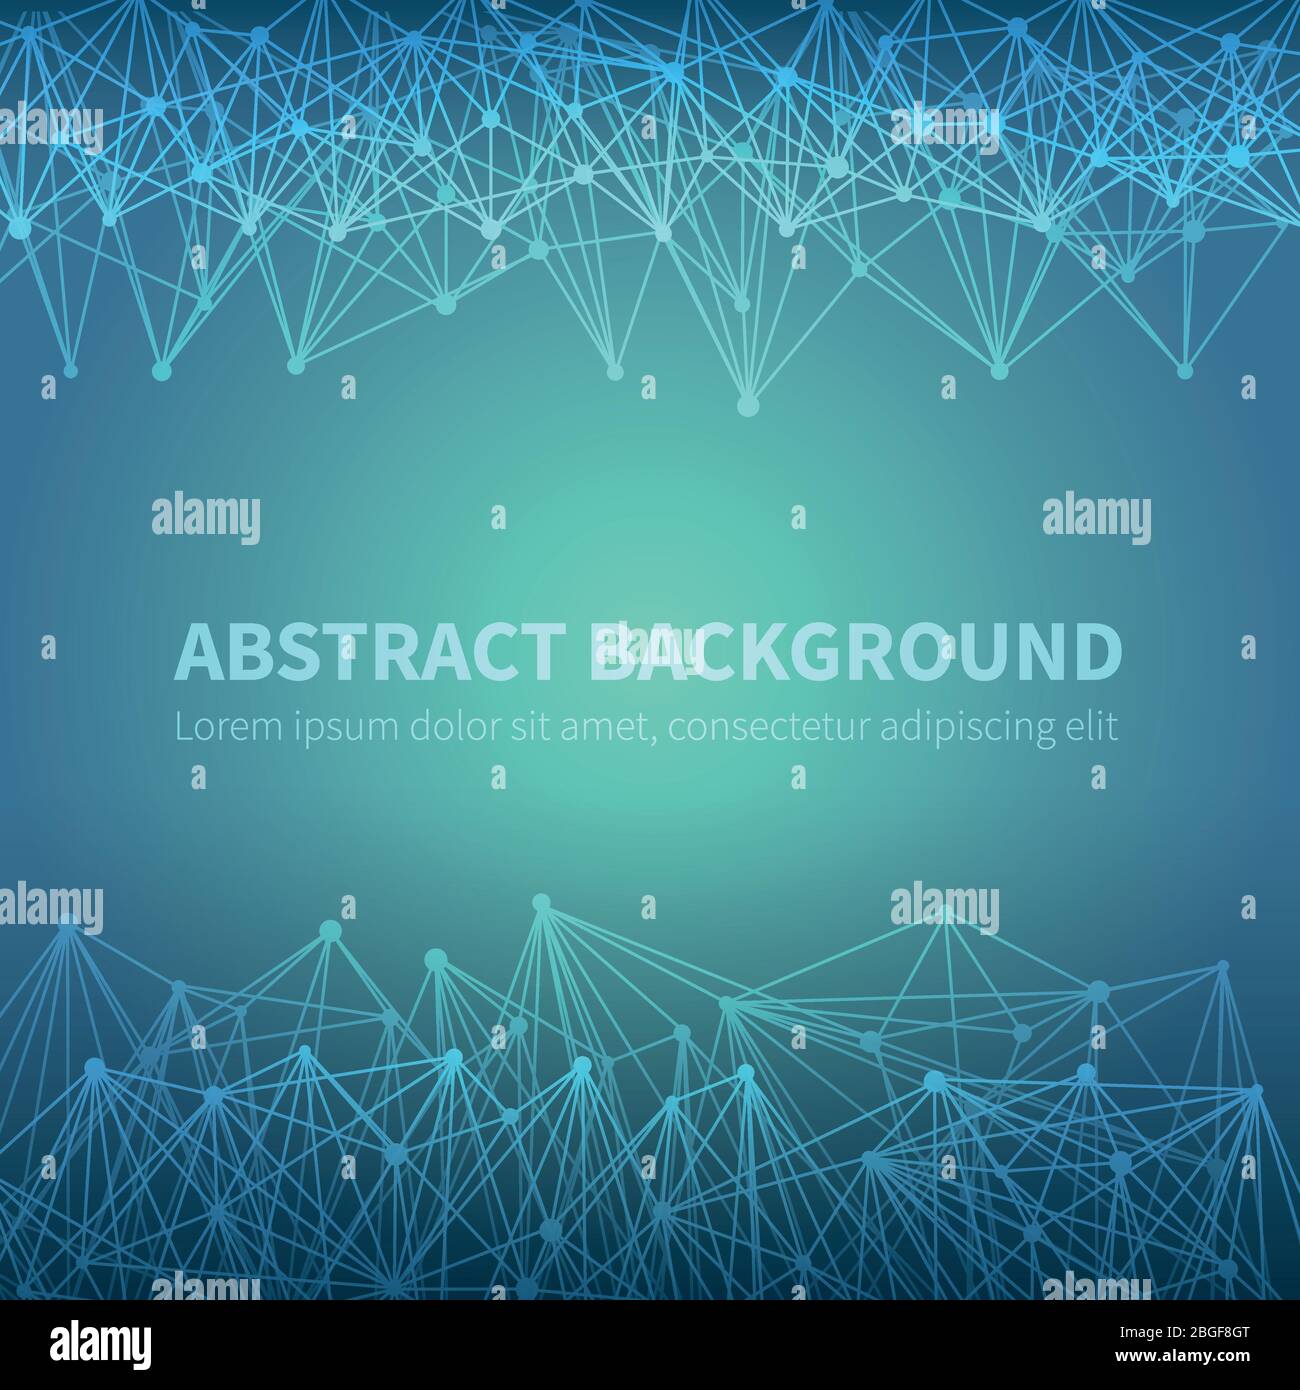 Abstract geometric chemical scientific vector background with molecular structure. Illustration of molecule structure, chemical molecular science technology Stock Vector